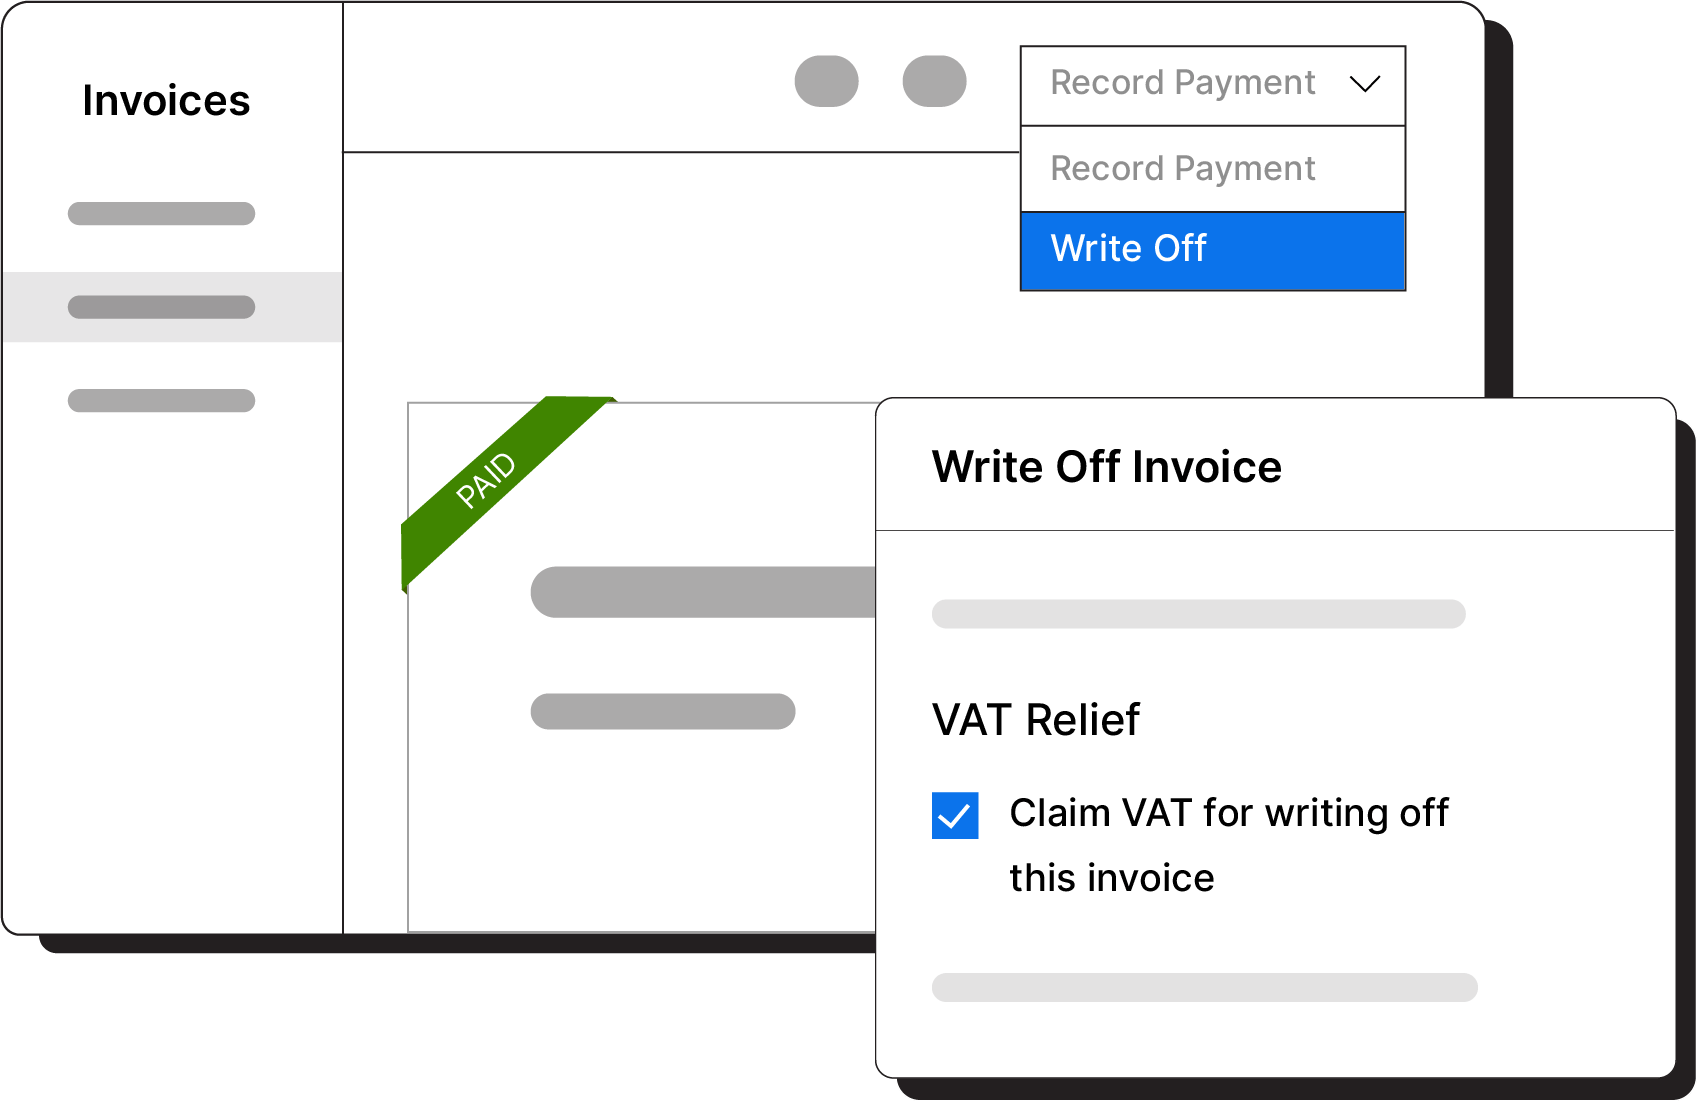 Claim VAT while writing off an invoice - UK edition